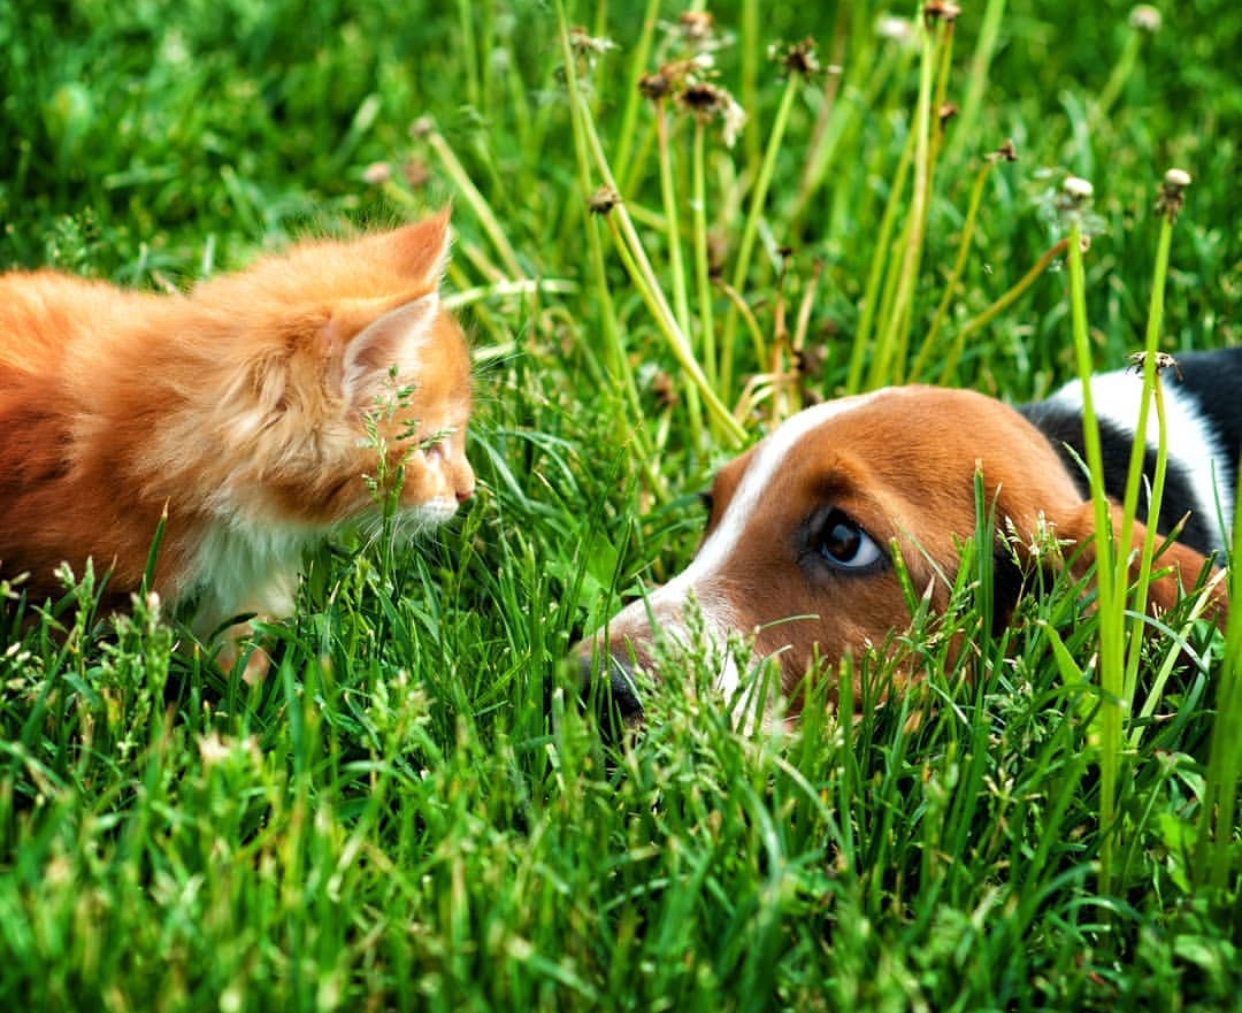 A Basset Hound lying in the grass while looking at the cat in front of him